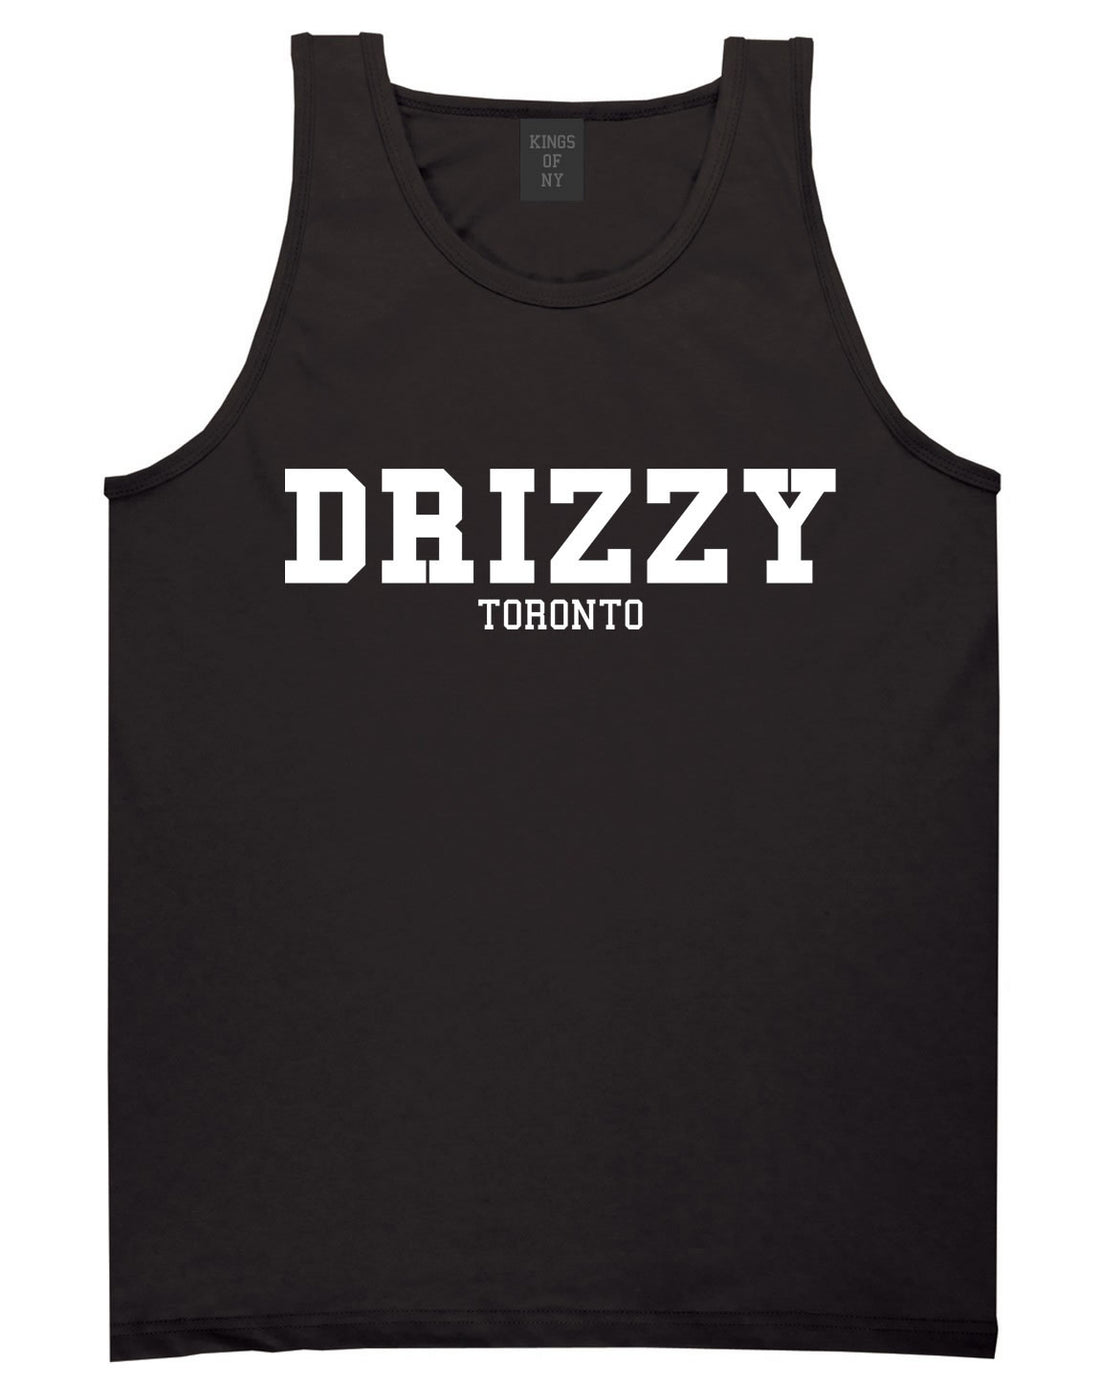 Drizzy Toronto Canada Tank Top in Black by Kings Of NY